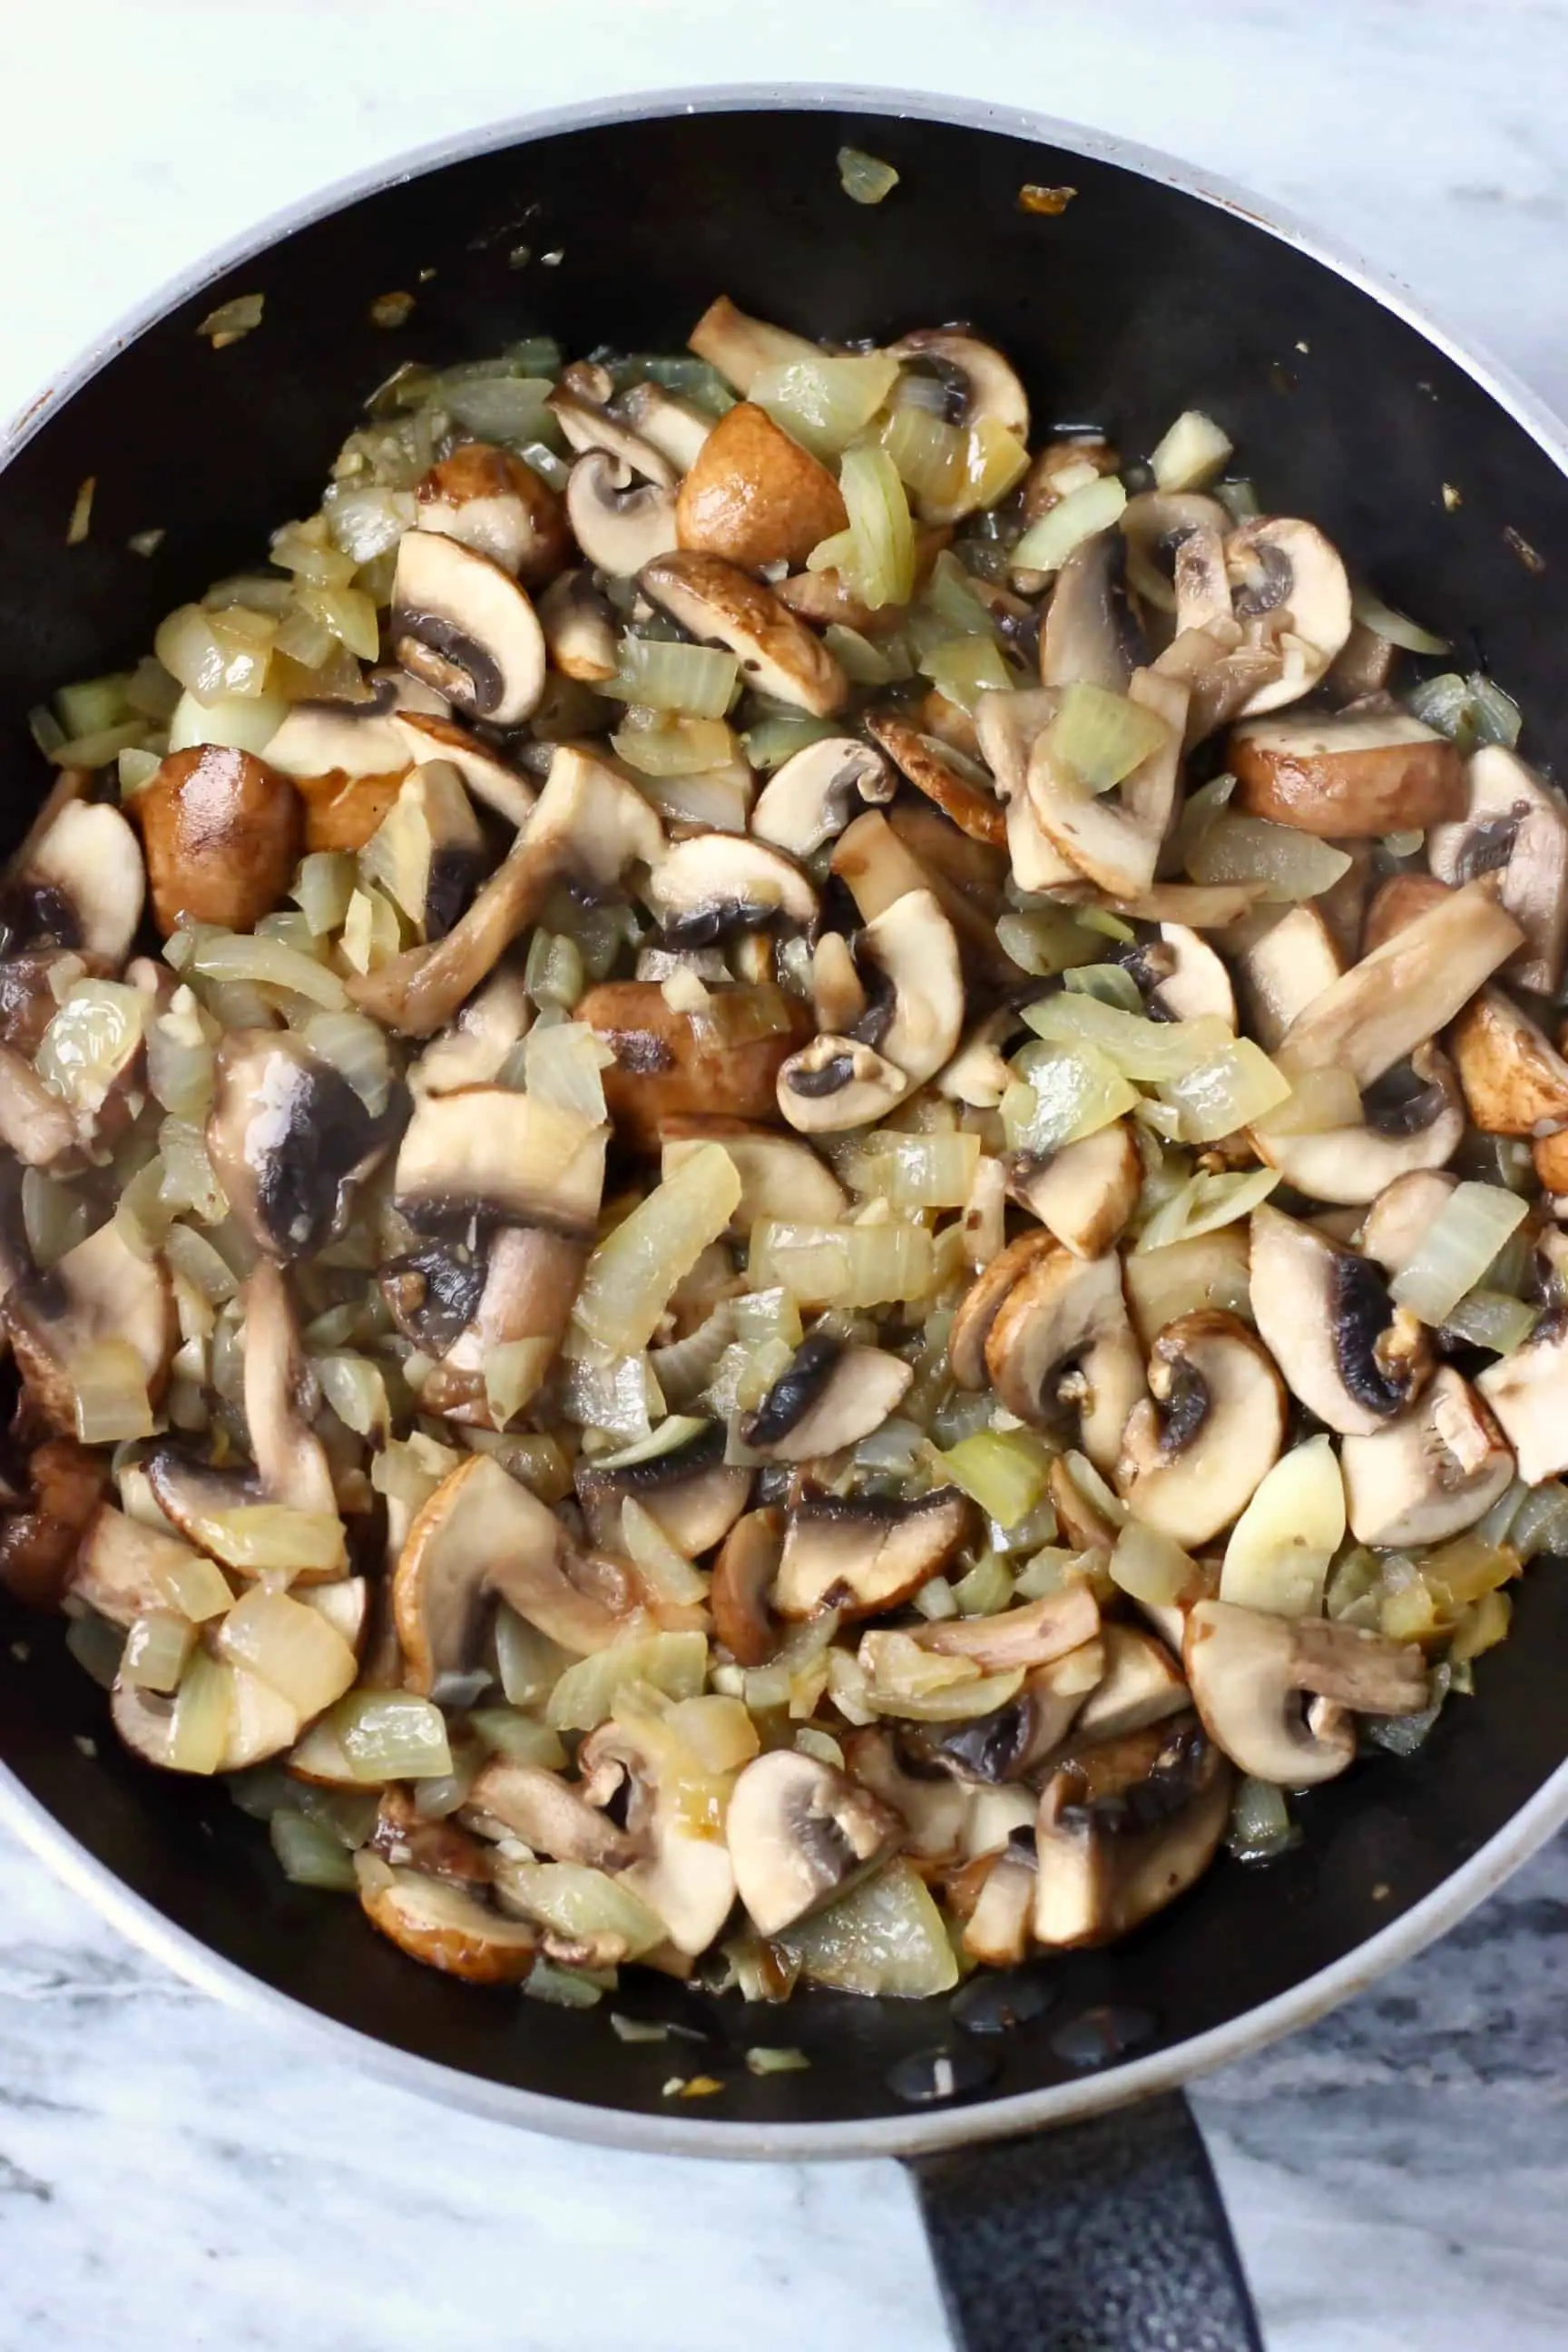 Diced onion, minced garlic and sliced mushrooms being fried in a frying pan 